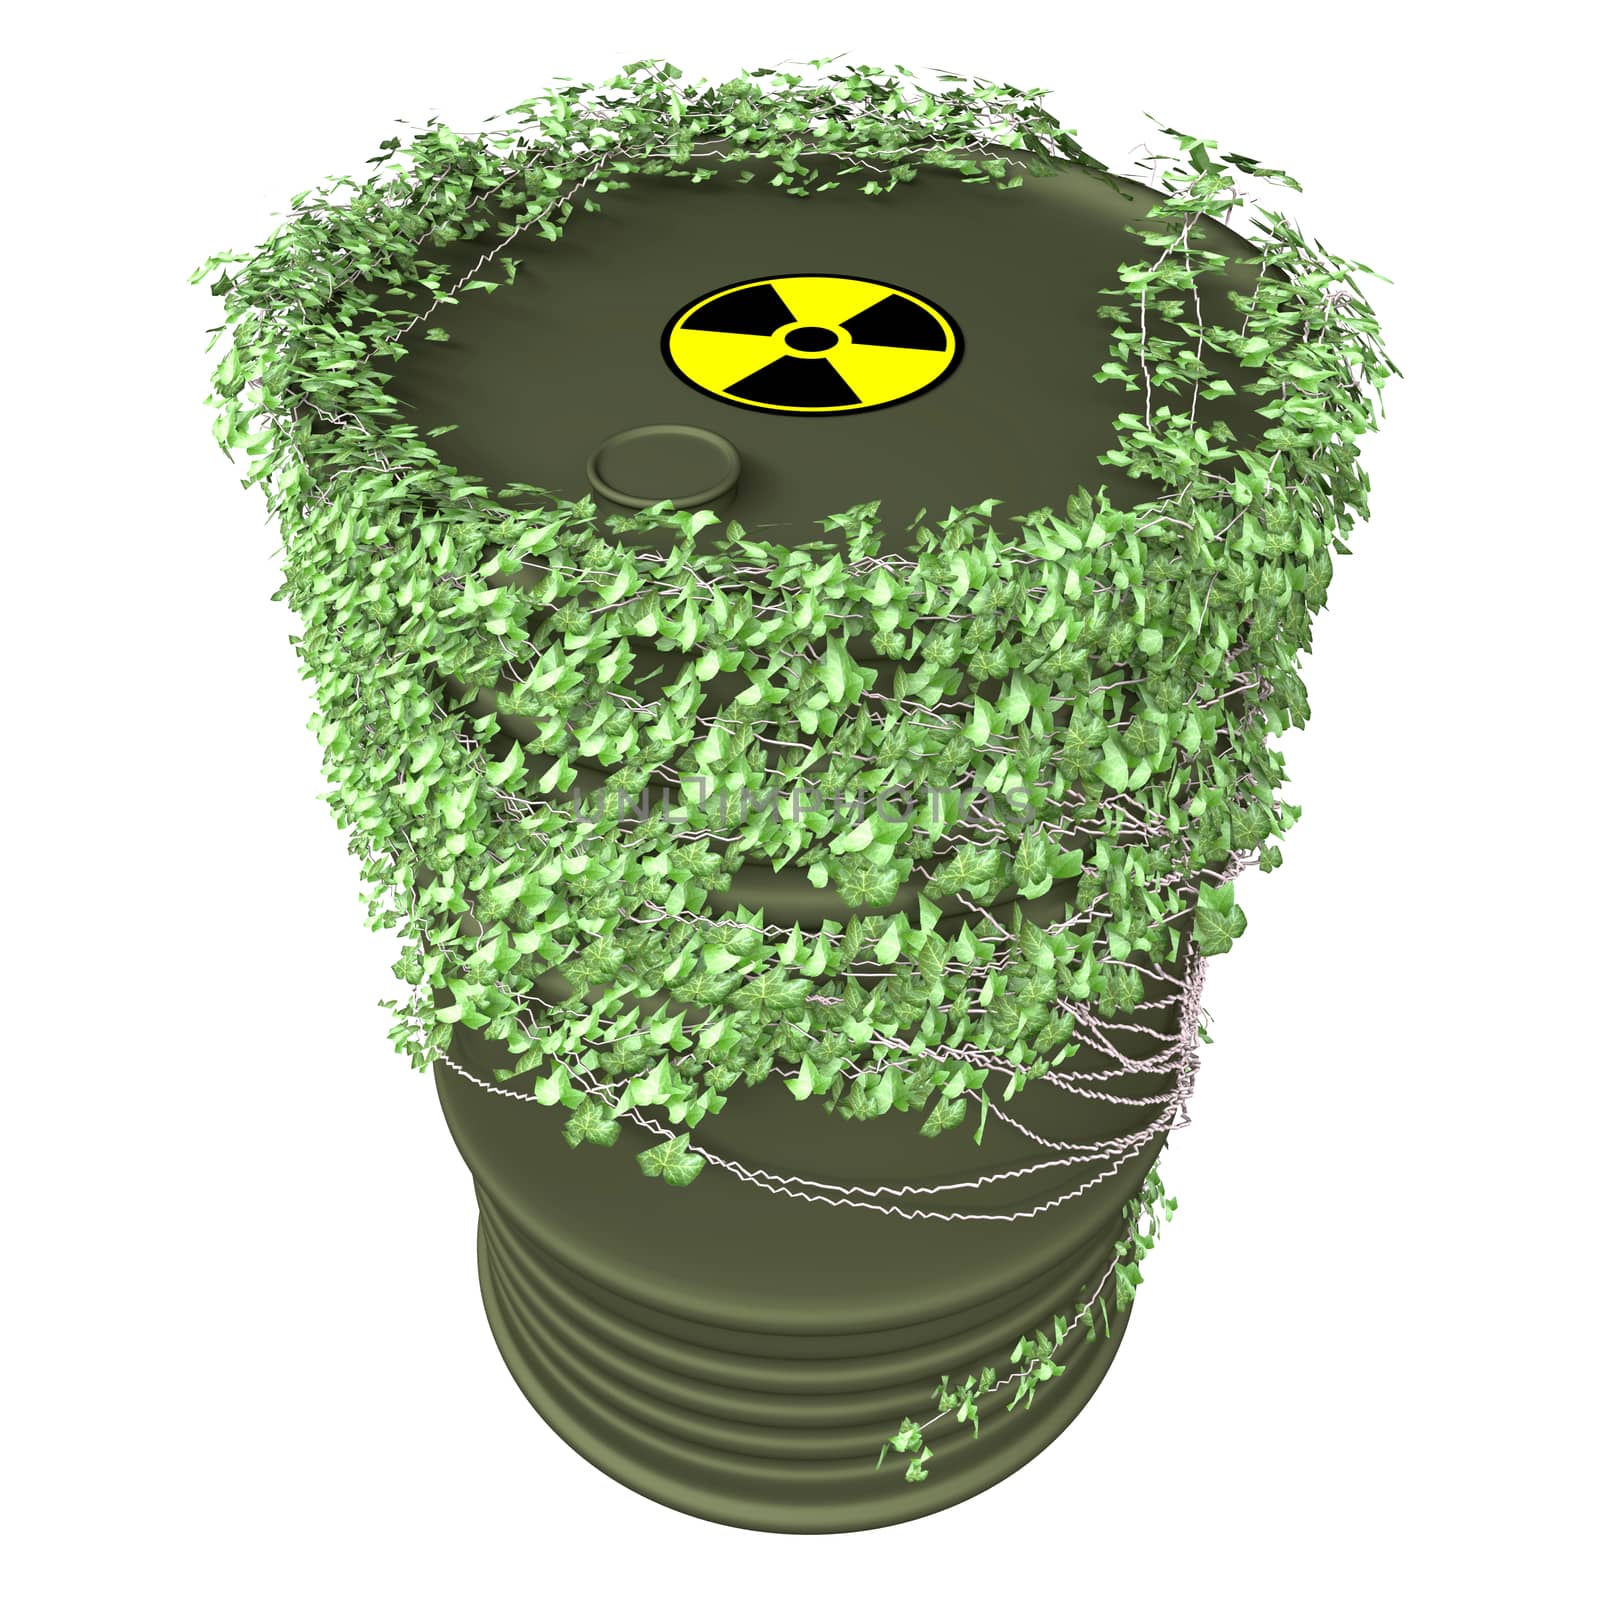 Barrel, Ivy, Nuclear sign. Ecology, alternative sustainable energy and environment protection saving business concept. 3d illustration.